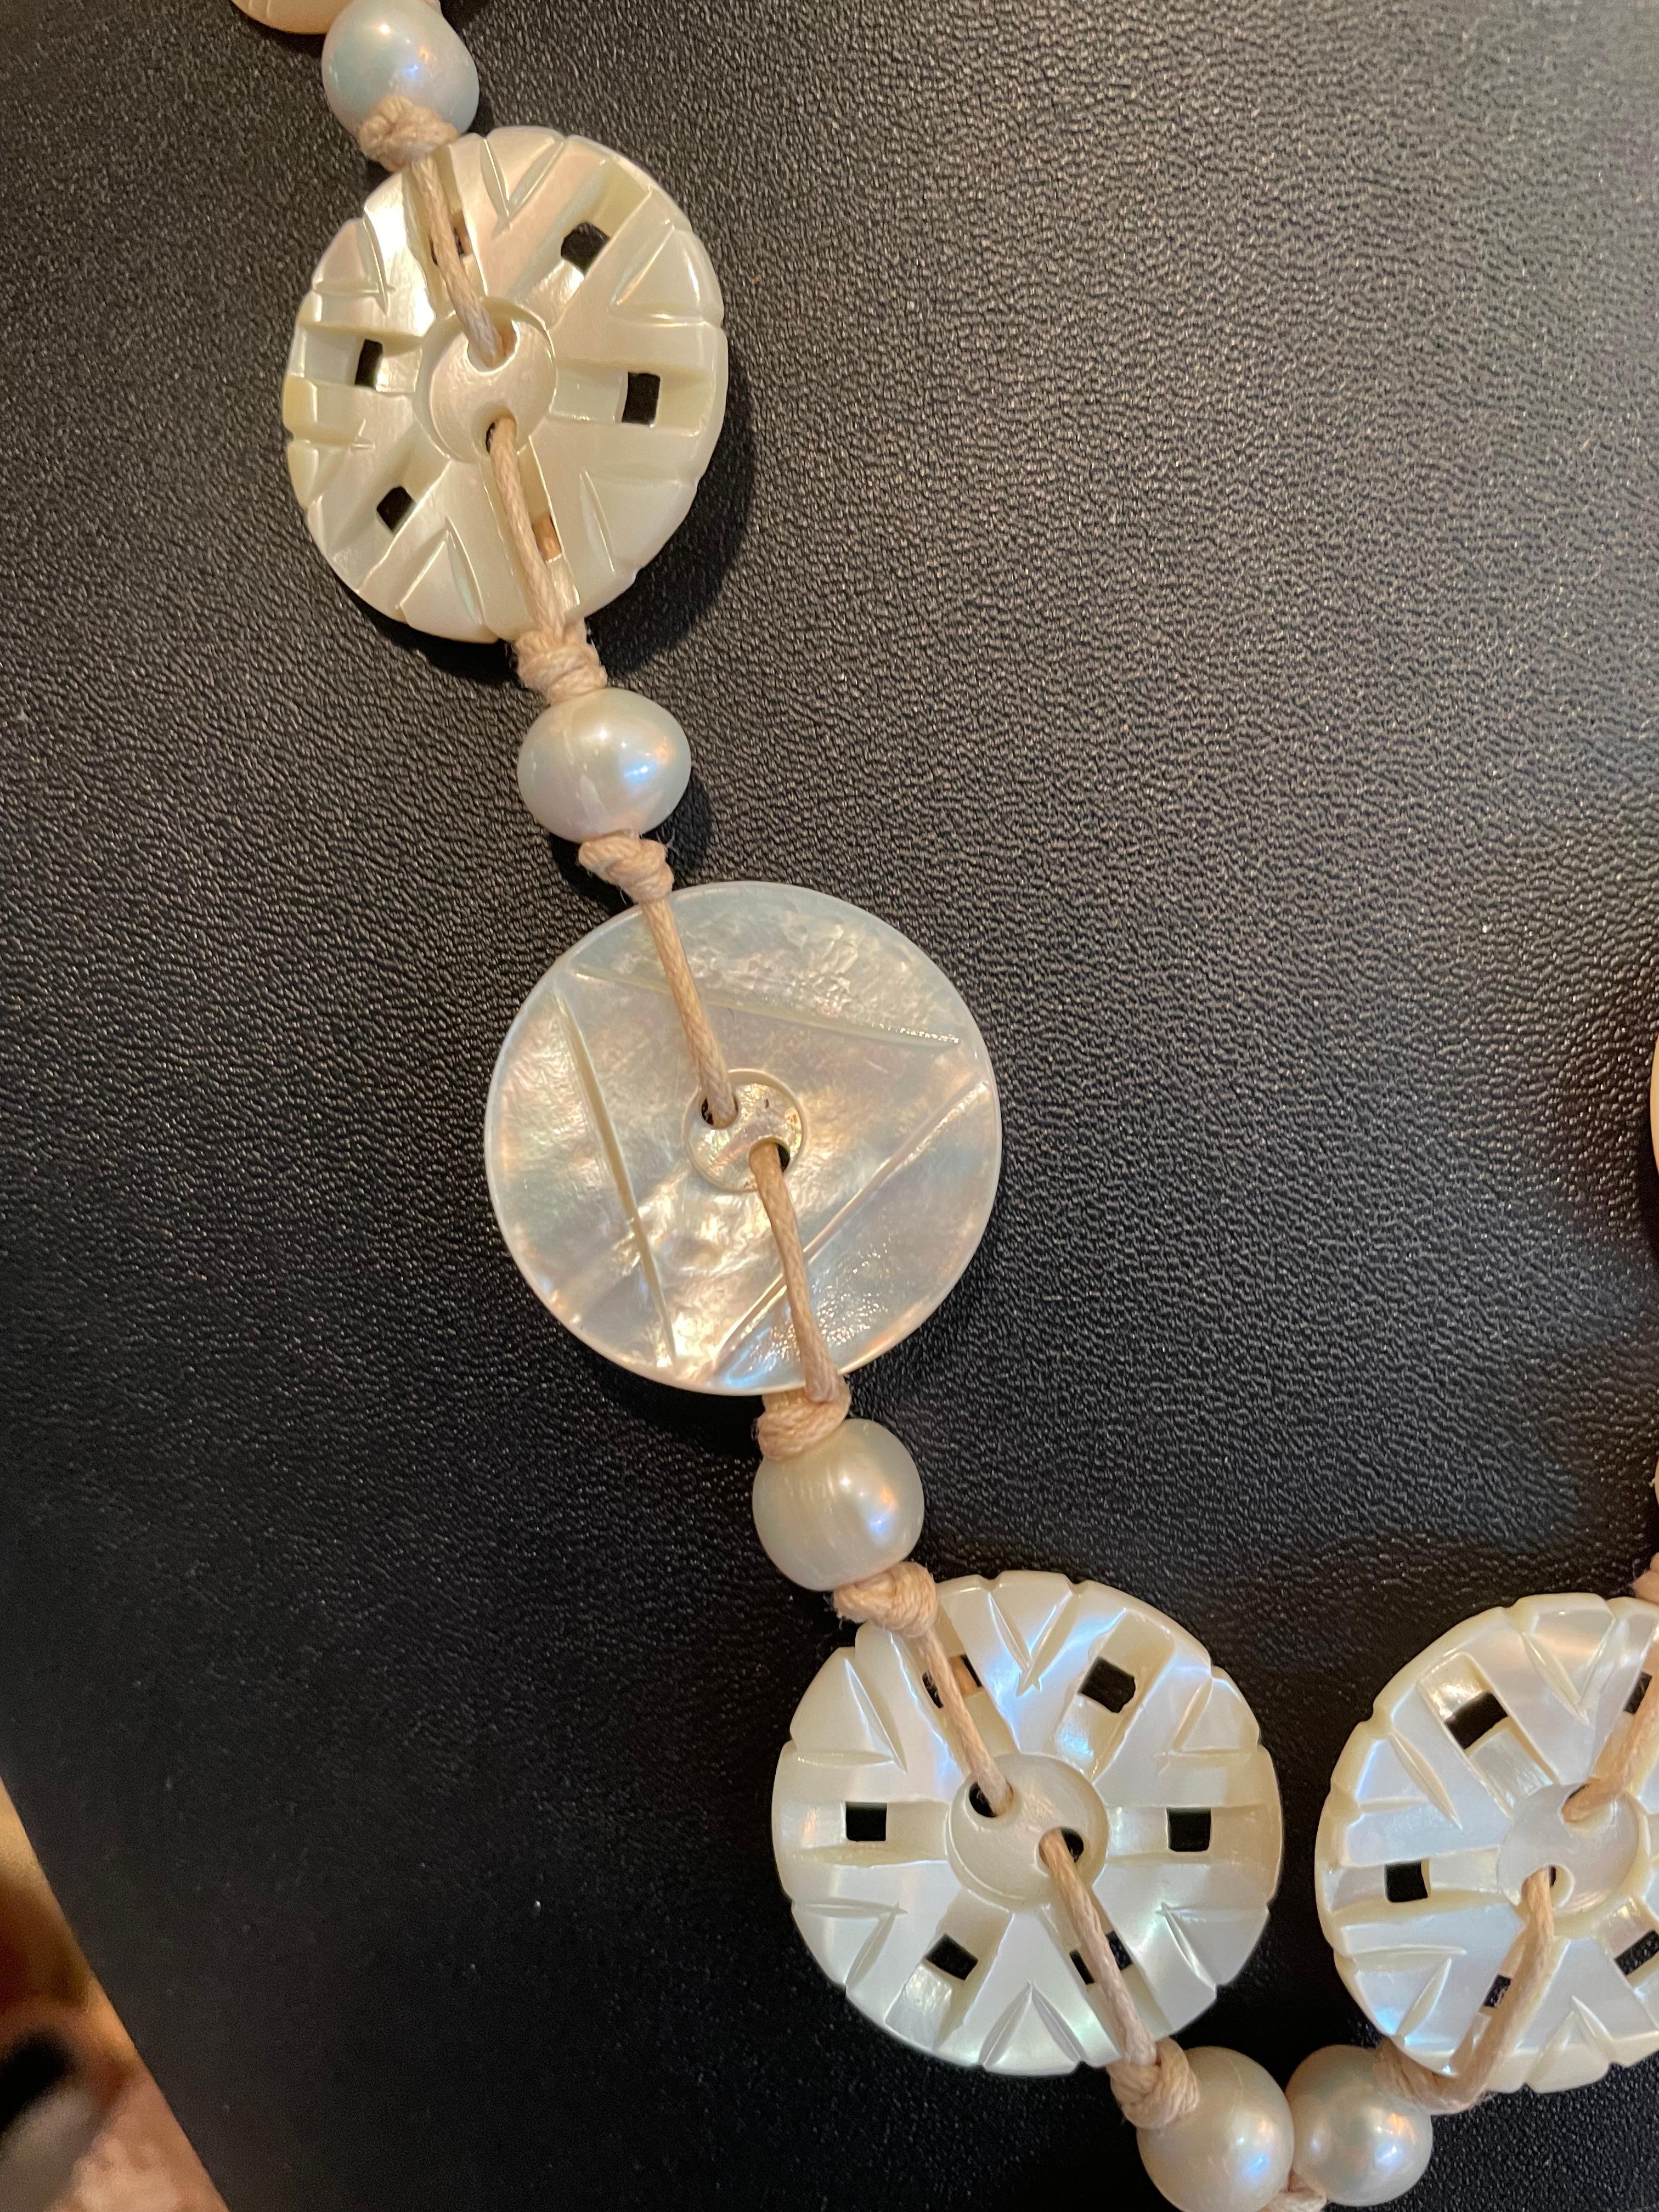 Lorraine’s Bijoux offers a Stunning, Handmade, One of a Kind, Vintage Mother of Pearl Button Necklace. These gorgeous, hand carved, genuine Mother of Pearl buttons comprise this unusual handcrafted piece. These buttons date from the 30’s-40’s and